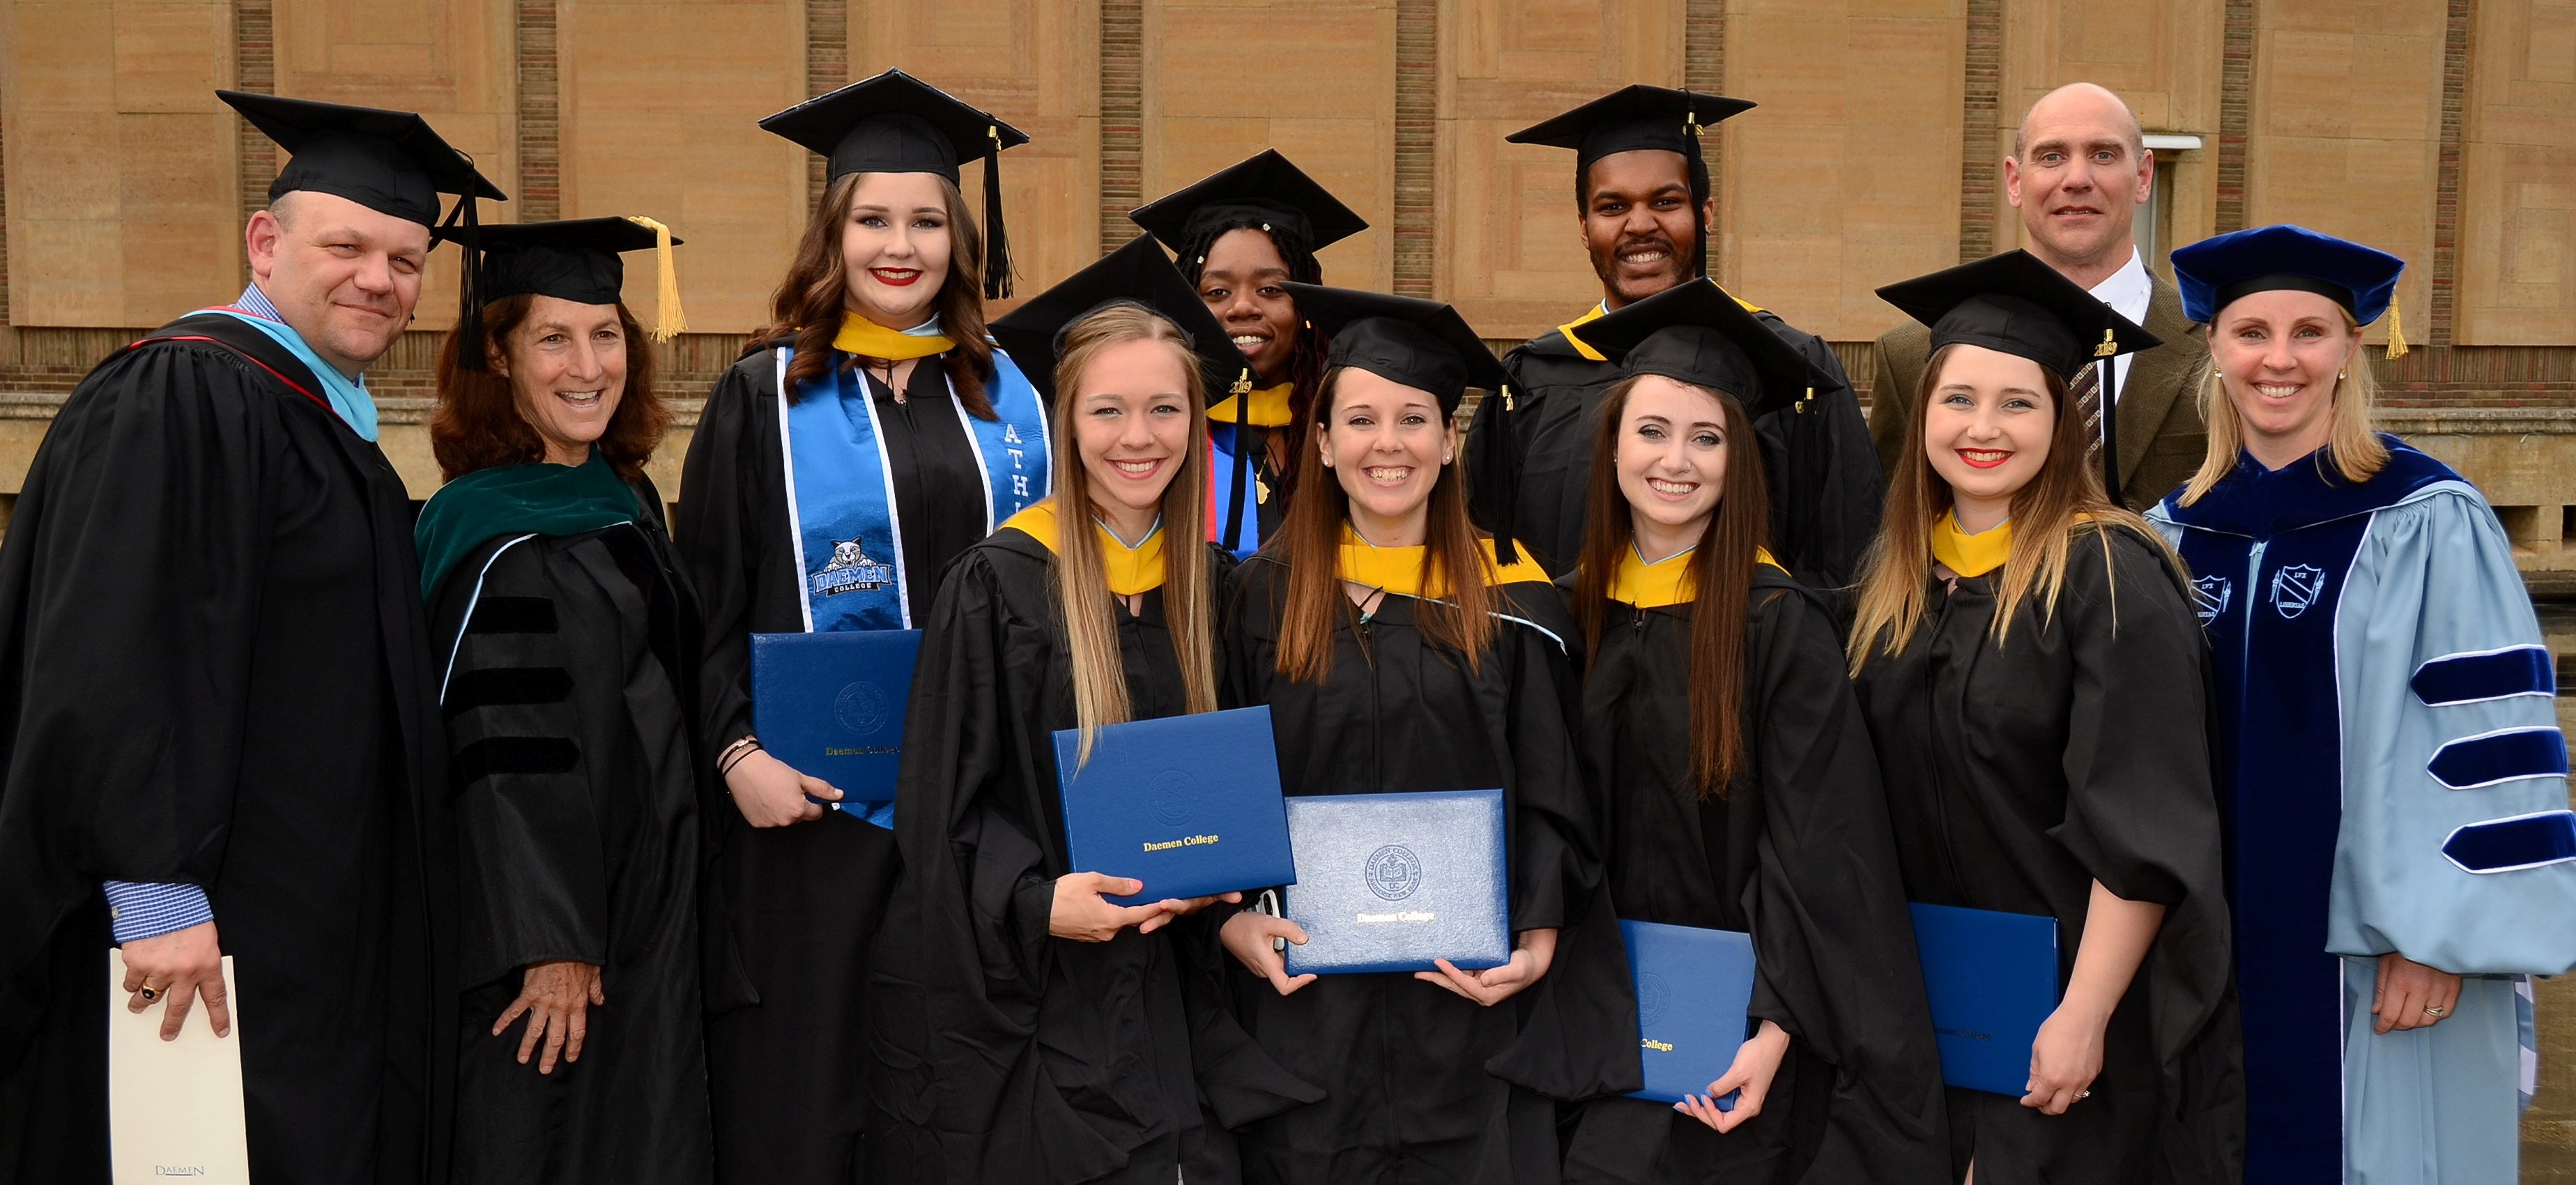 Athletic training students at graduation standing together outside of Kleinhan's Music Hall